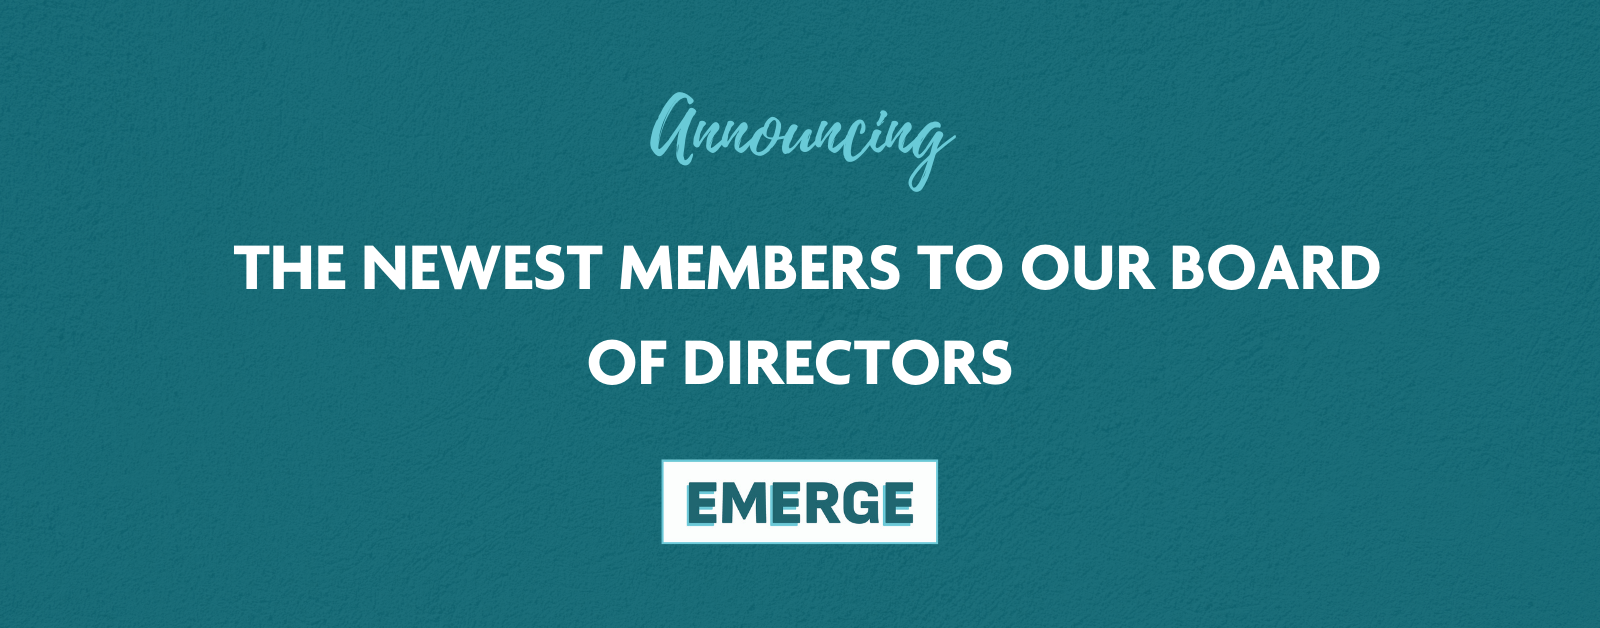 Announcing the newest members to our Board of Directors.